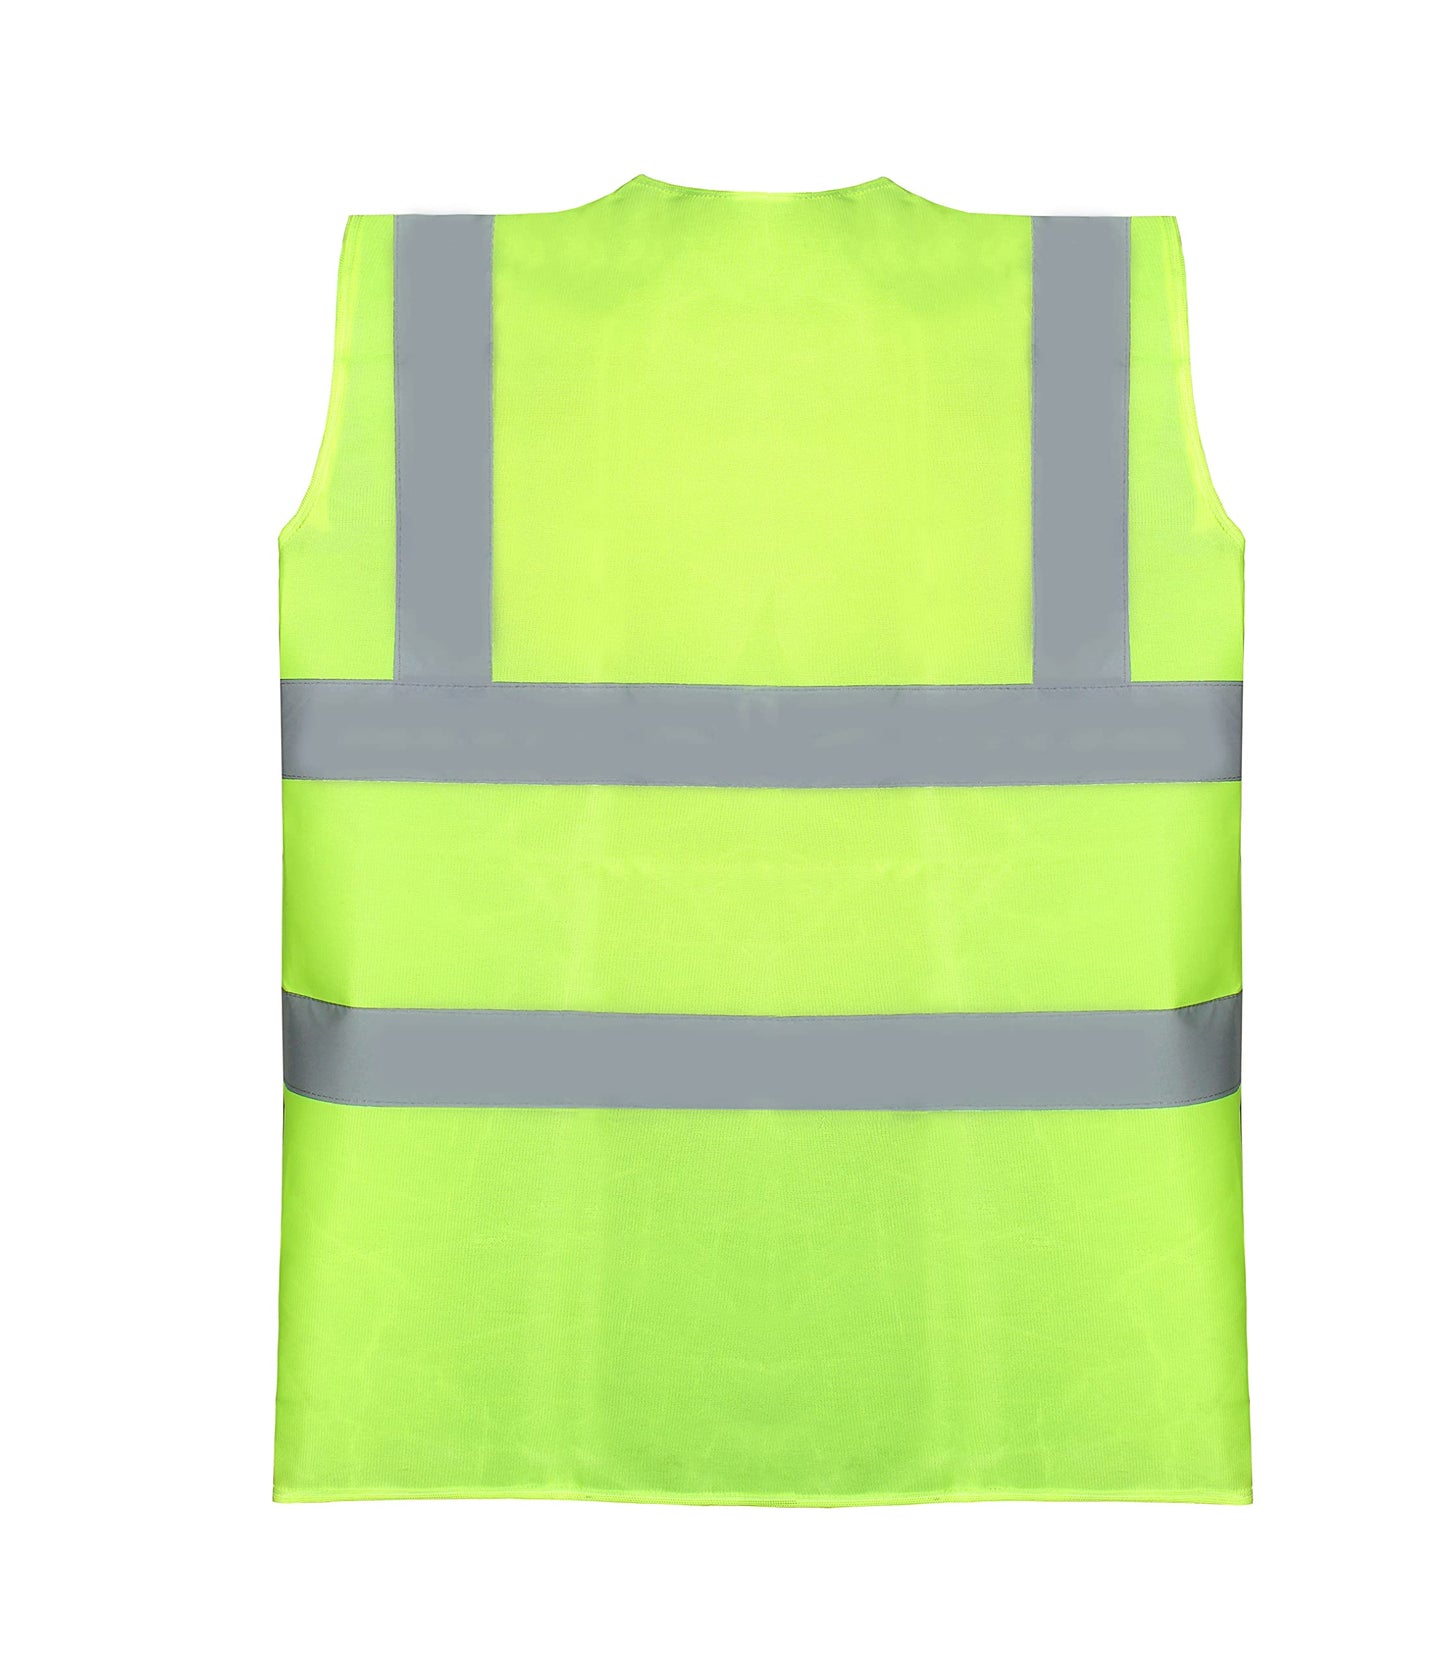 THE CLOWNFISH Pack Of 10 Hi-Vis Reflective Safety Vest Unisex Polyester Workwear Jacket Safety Coat with Reflective Tape for Traffic Sports Construction Site (XL, Green)